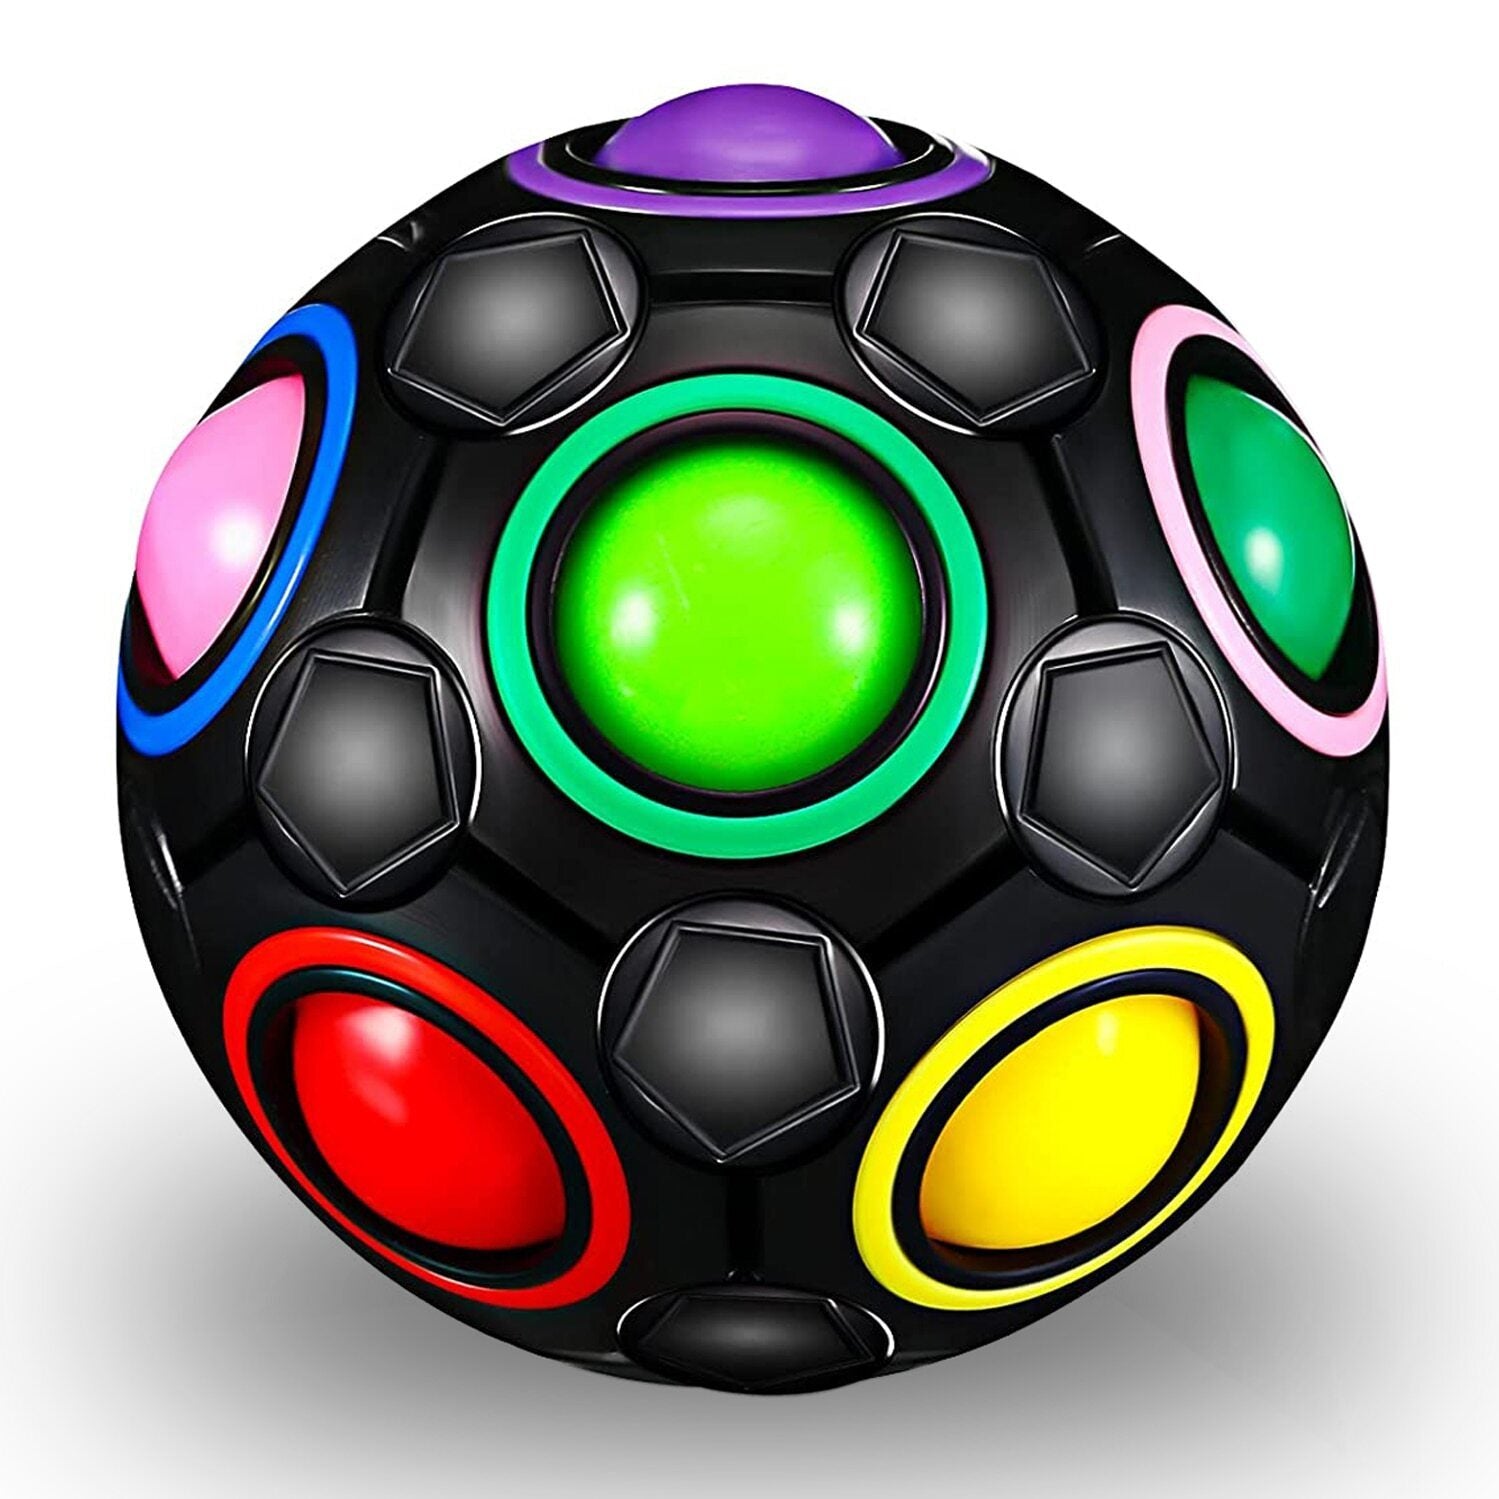 Rainbow Puzzle Ball: A vibrant jigsaw ball placed on a pristine white surface.